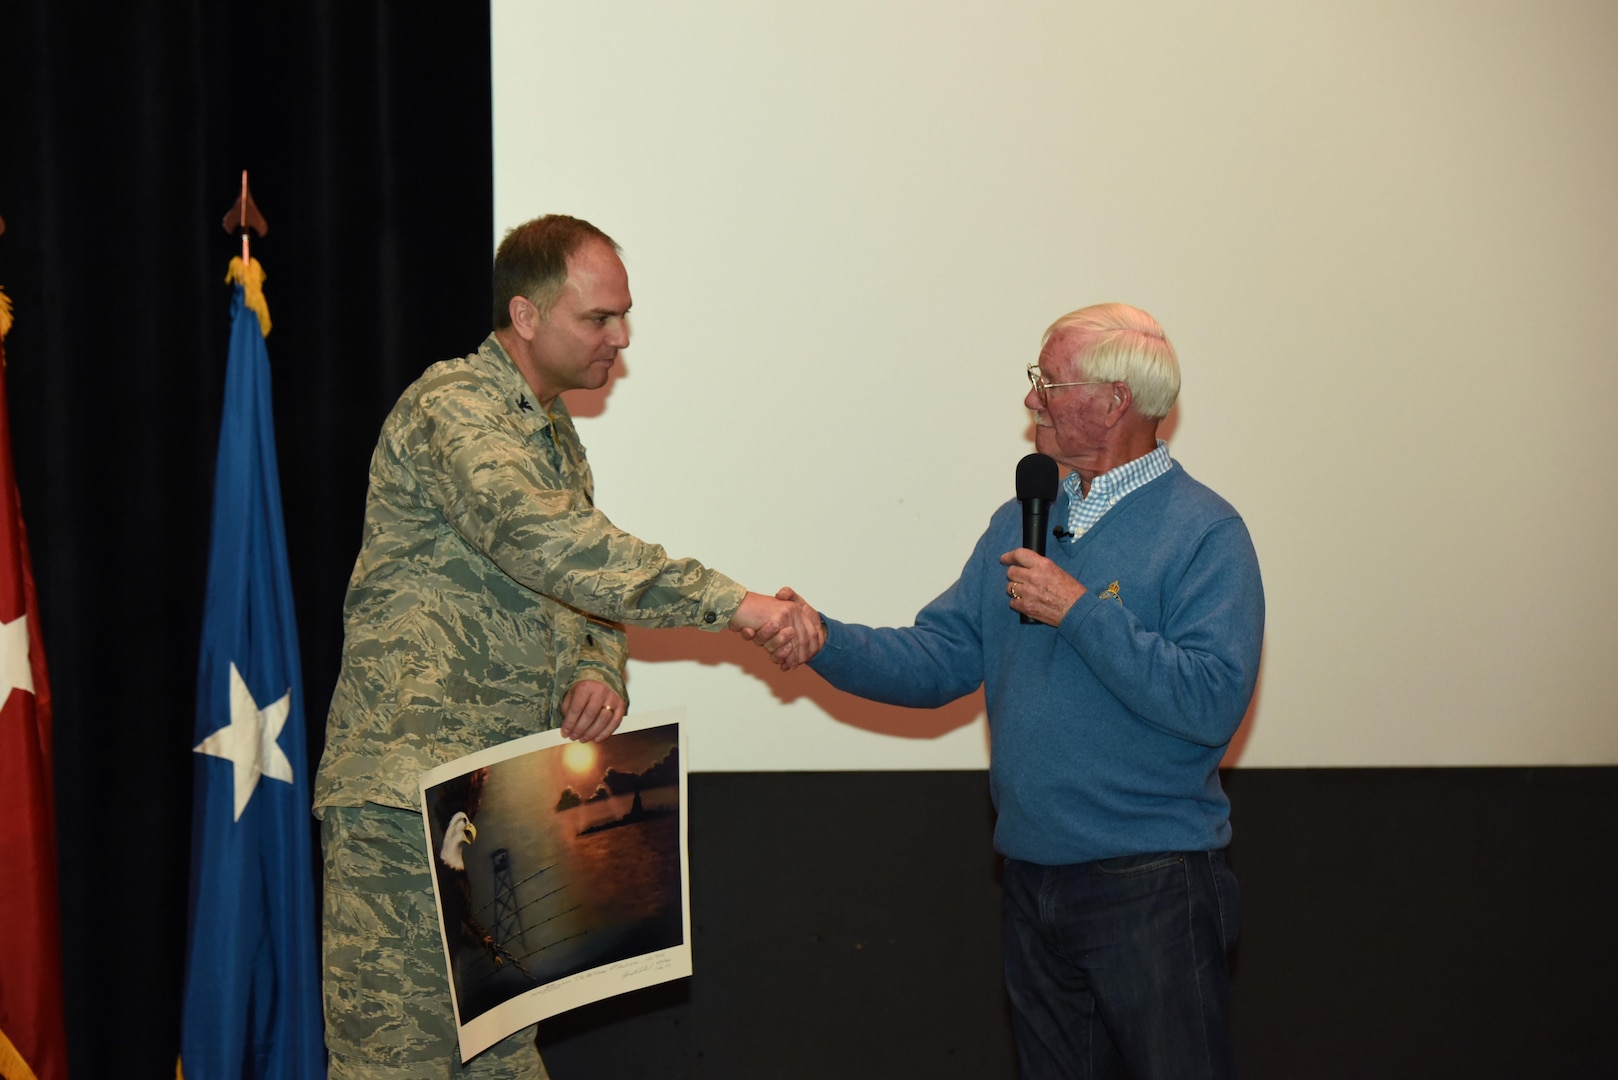 Retired U. S. Air Force Col. Ed Hubbard presents a limited edition lithograph that he painted in the early 1980s to 153rd Airlift Wing Commander Col. Bradley Swanson. Hubbard detailed his experiences as a POW and provided insight on keeping a positive attitude during captivity.